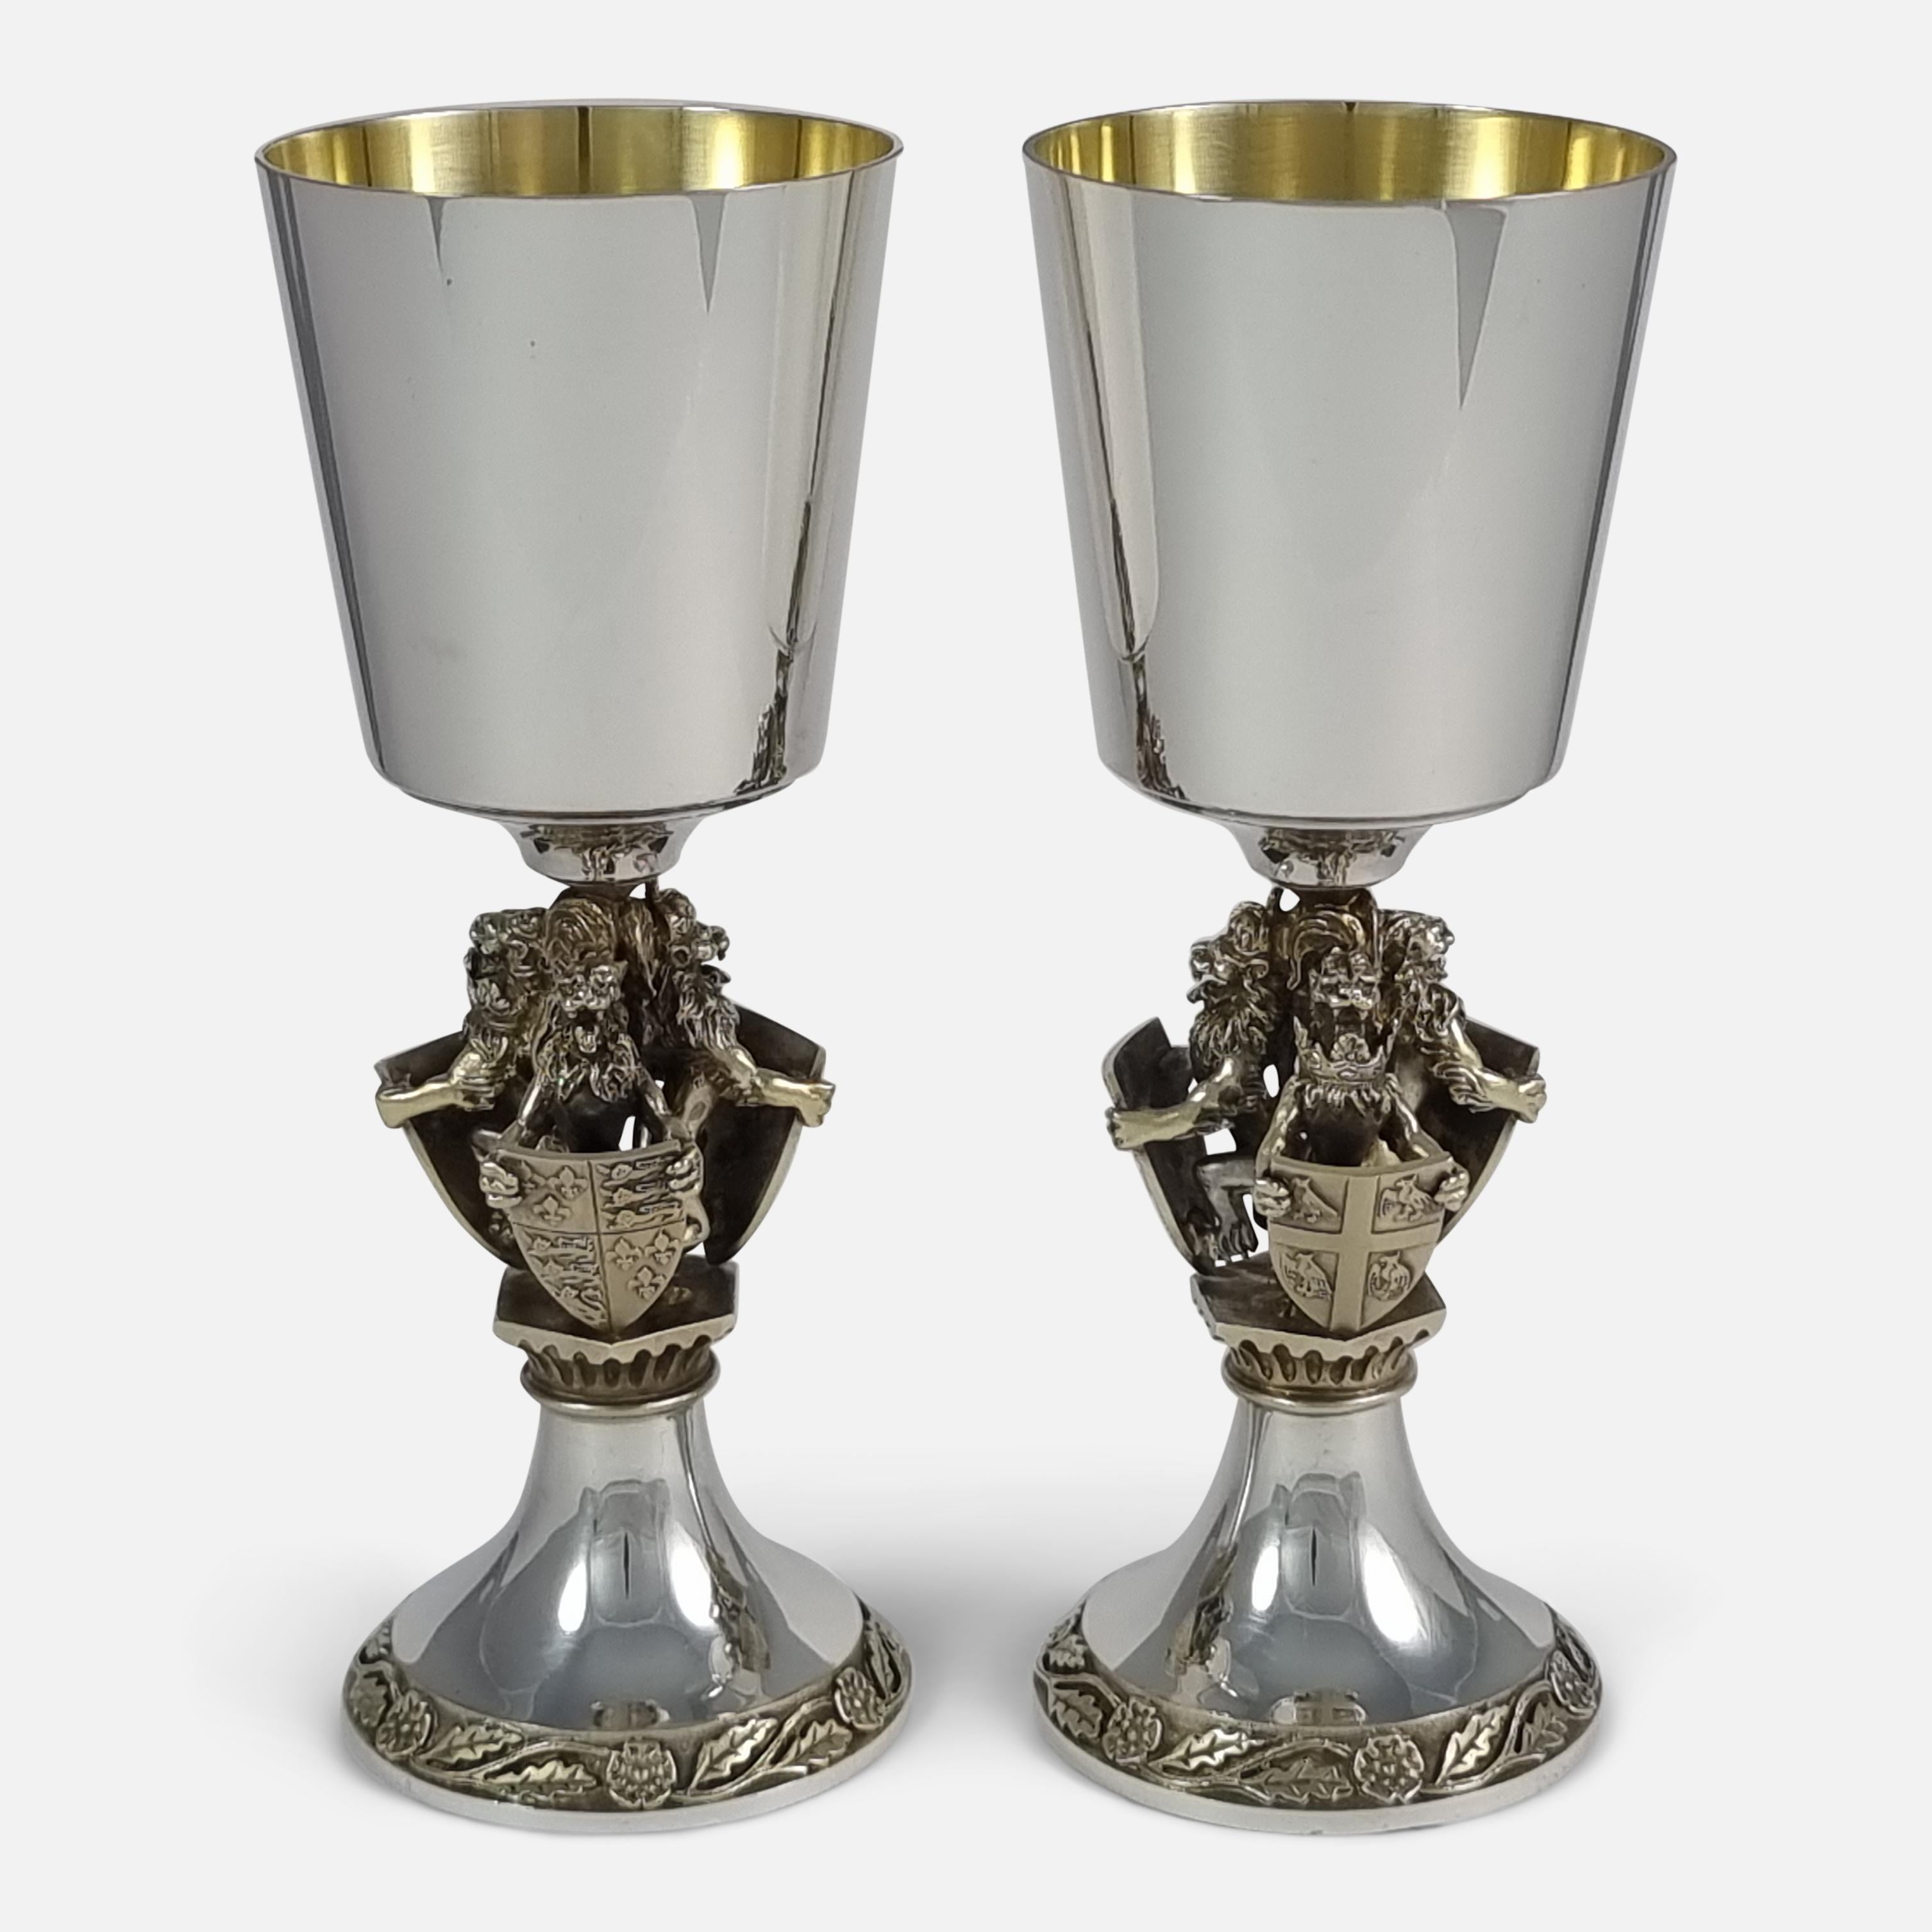 Set of Four Aurum Silver Gilt 'College of Arms' Goblets, Hector Miller, 1984 For Sale 2